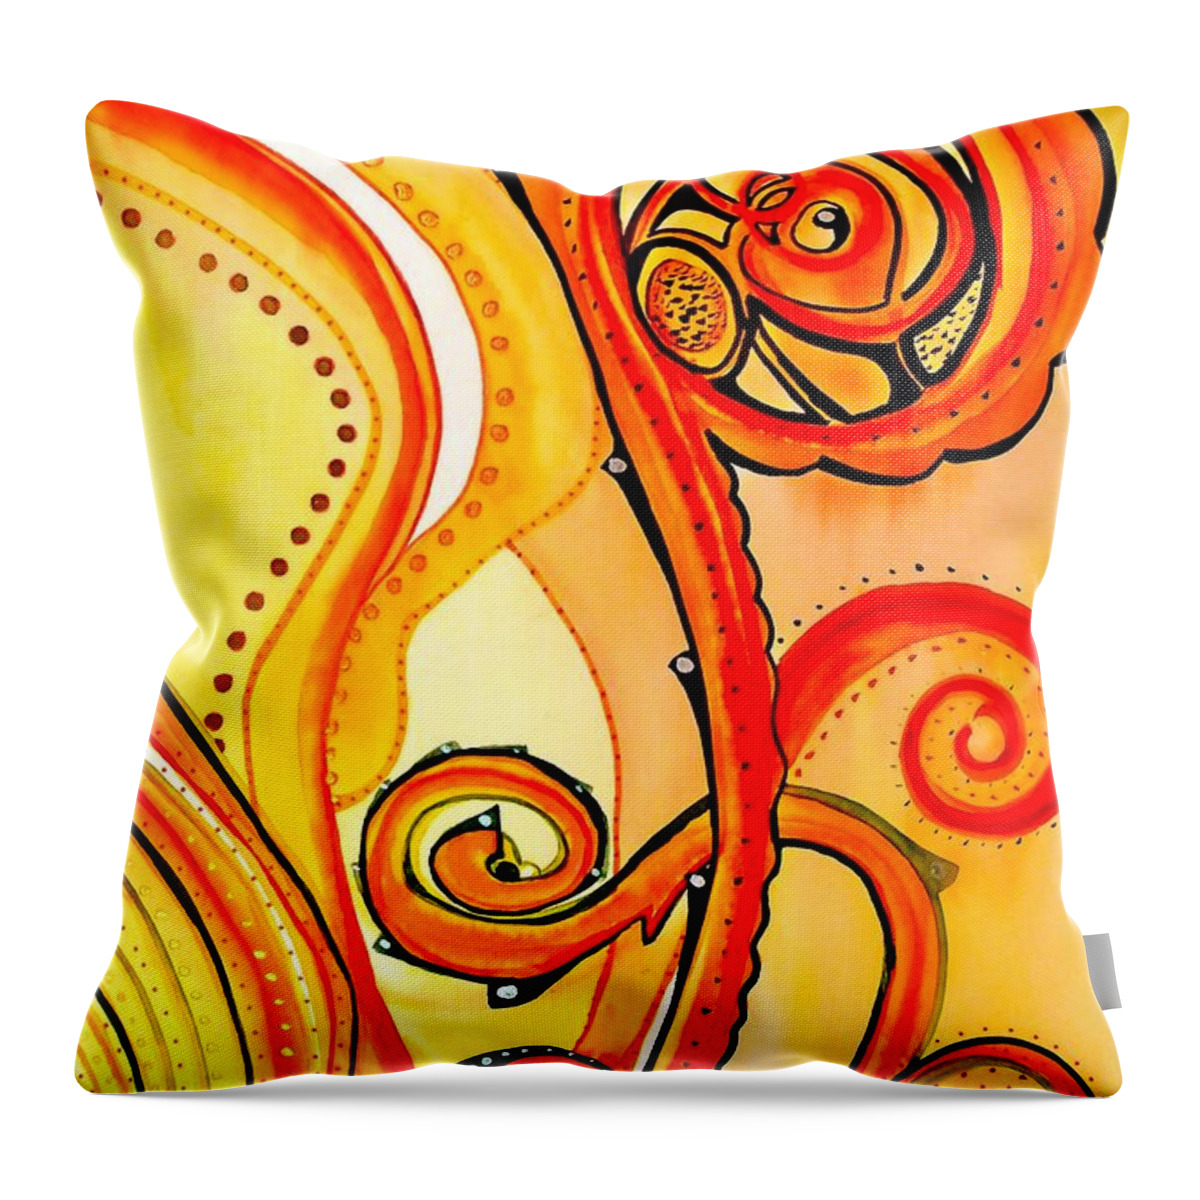 Sunny Throw Pillow featuring the painting Sunny Flower - Art by Dora Hathazi Mendes by Dora Hathazi Mendes